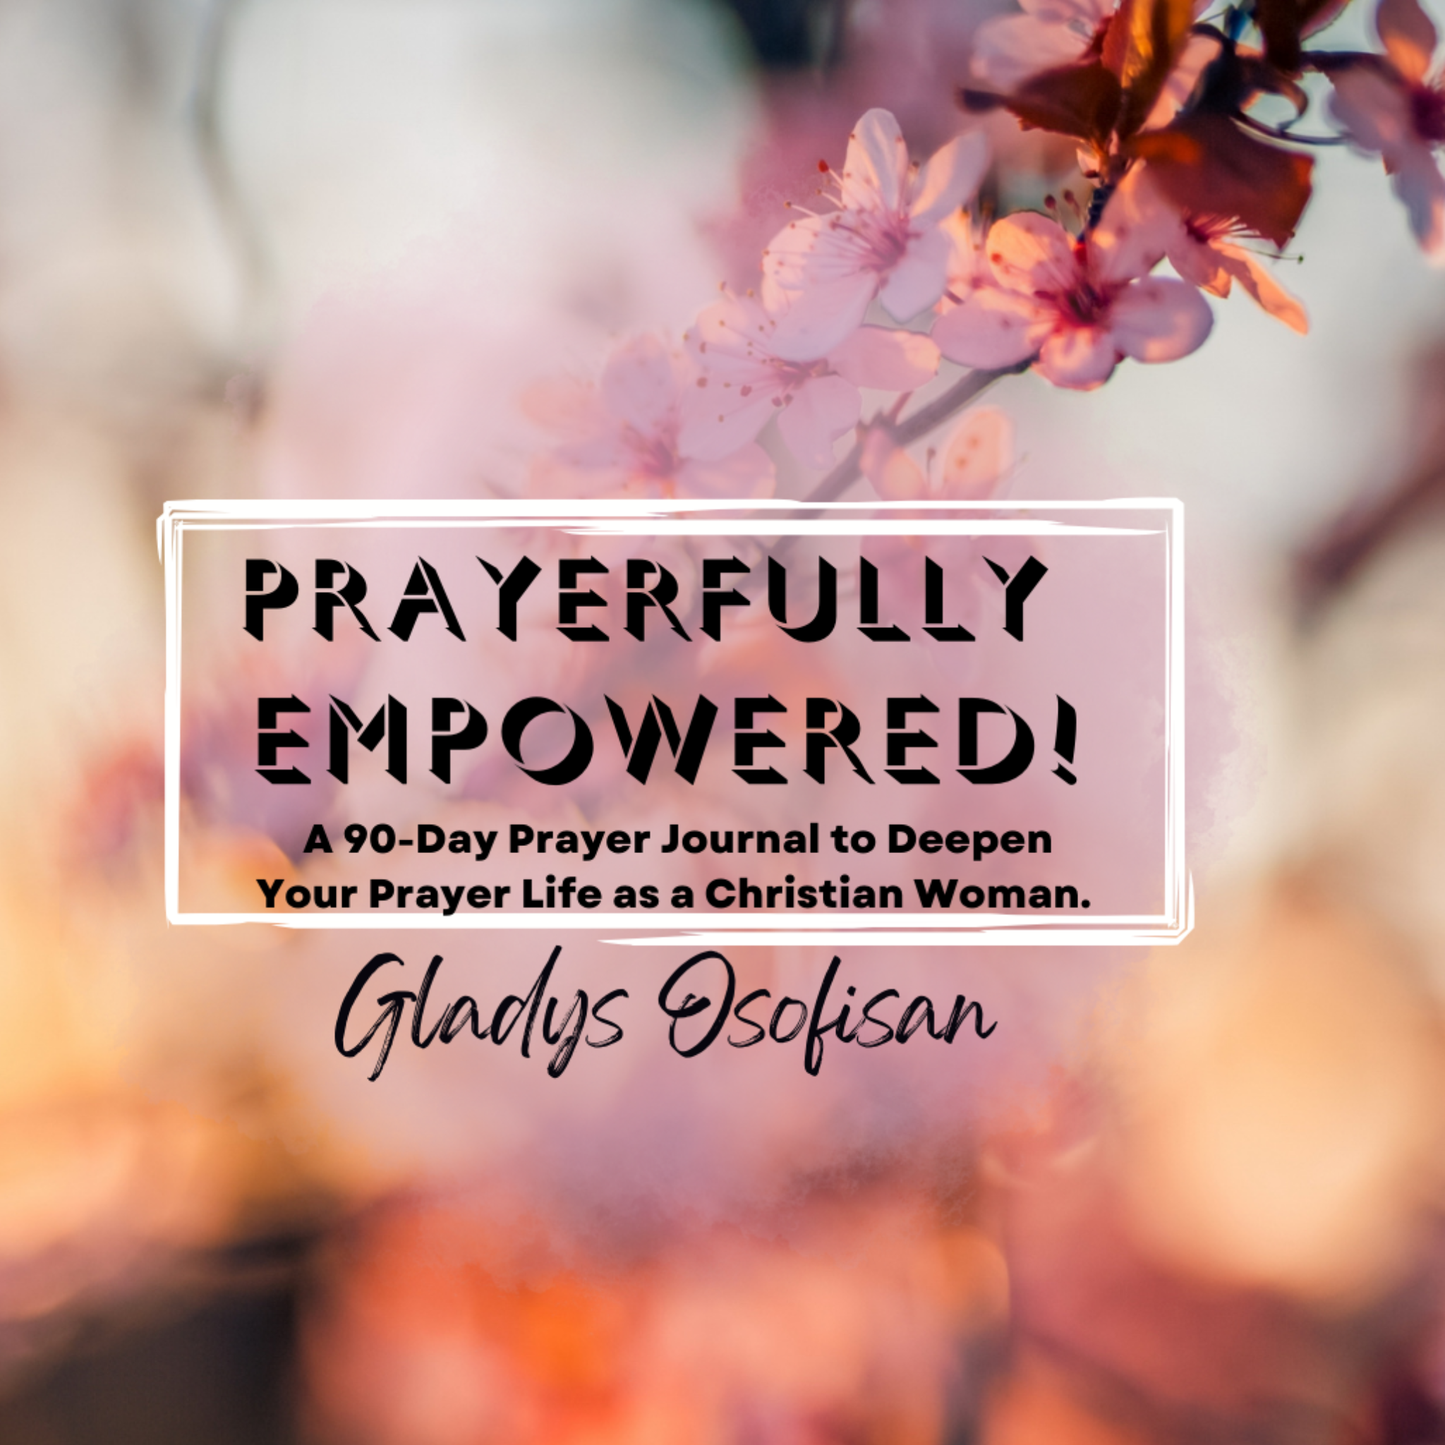 Prayerfully Empowered: A 90-Day Prayer Journal for Christian Women.  AVAILABLE ON PREORDER! SHIPS IN 2 WEEKS!